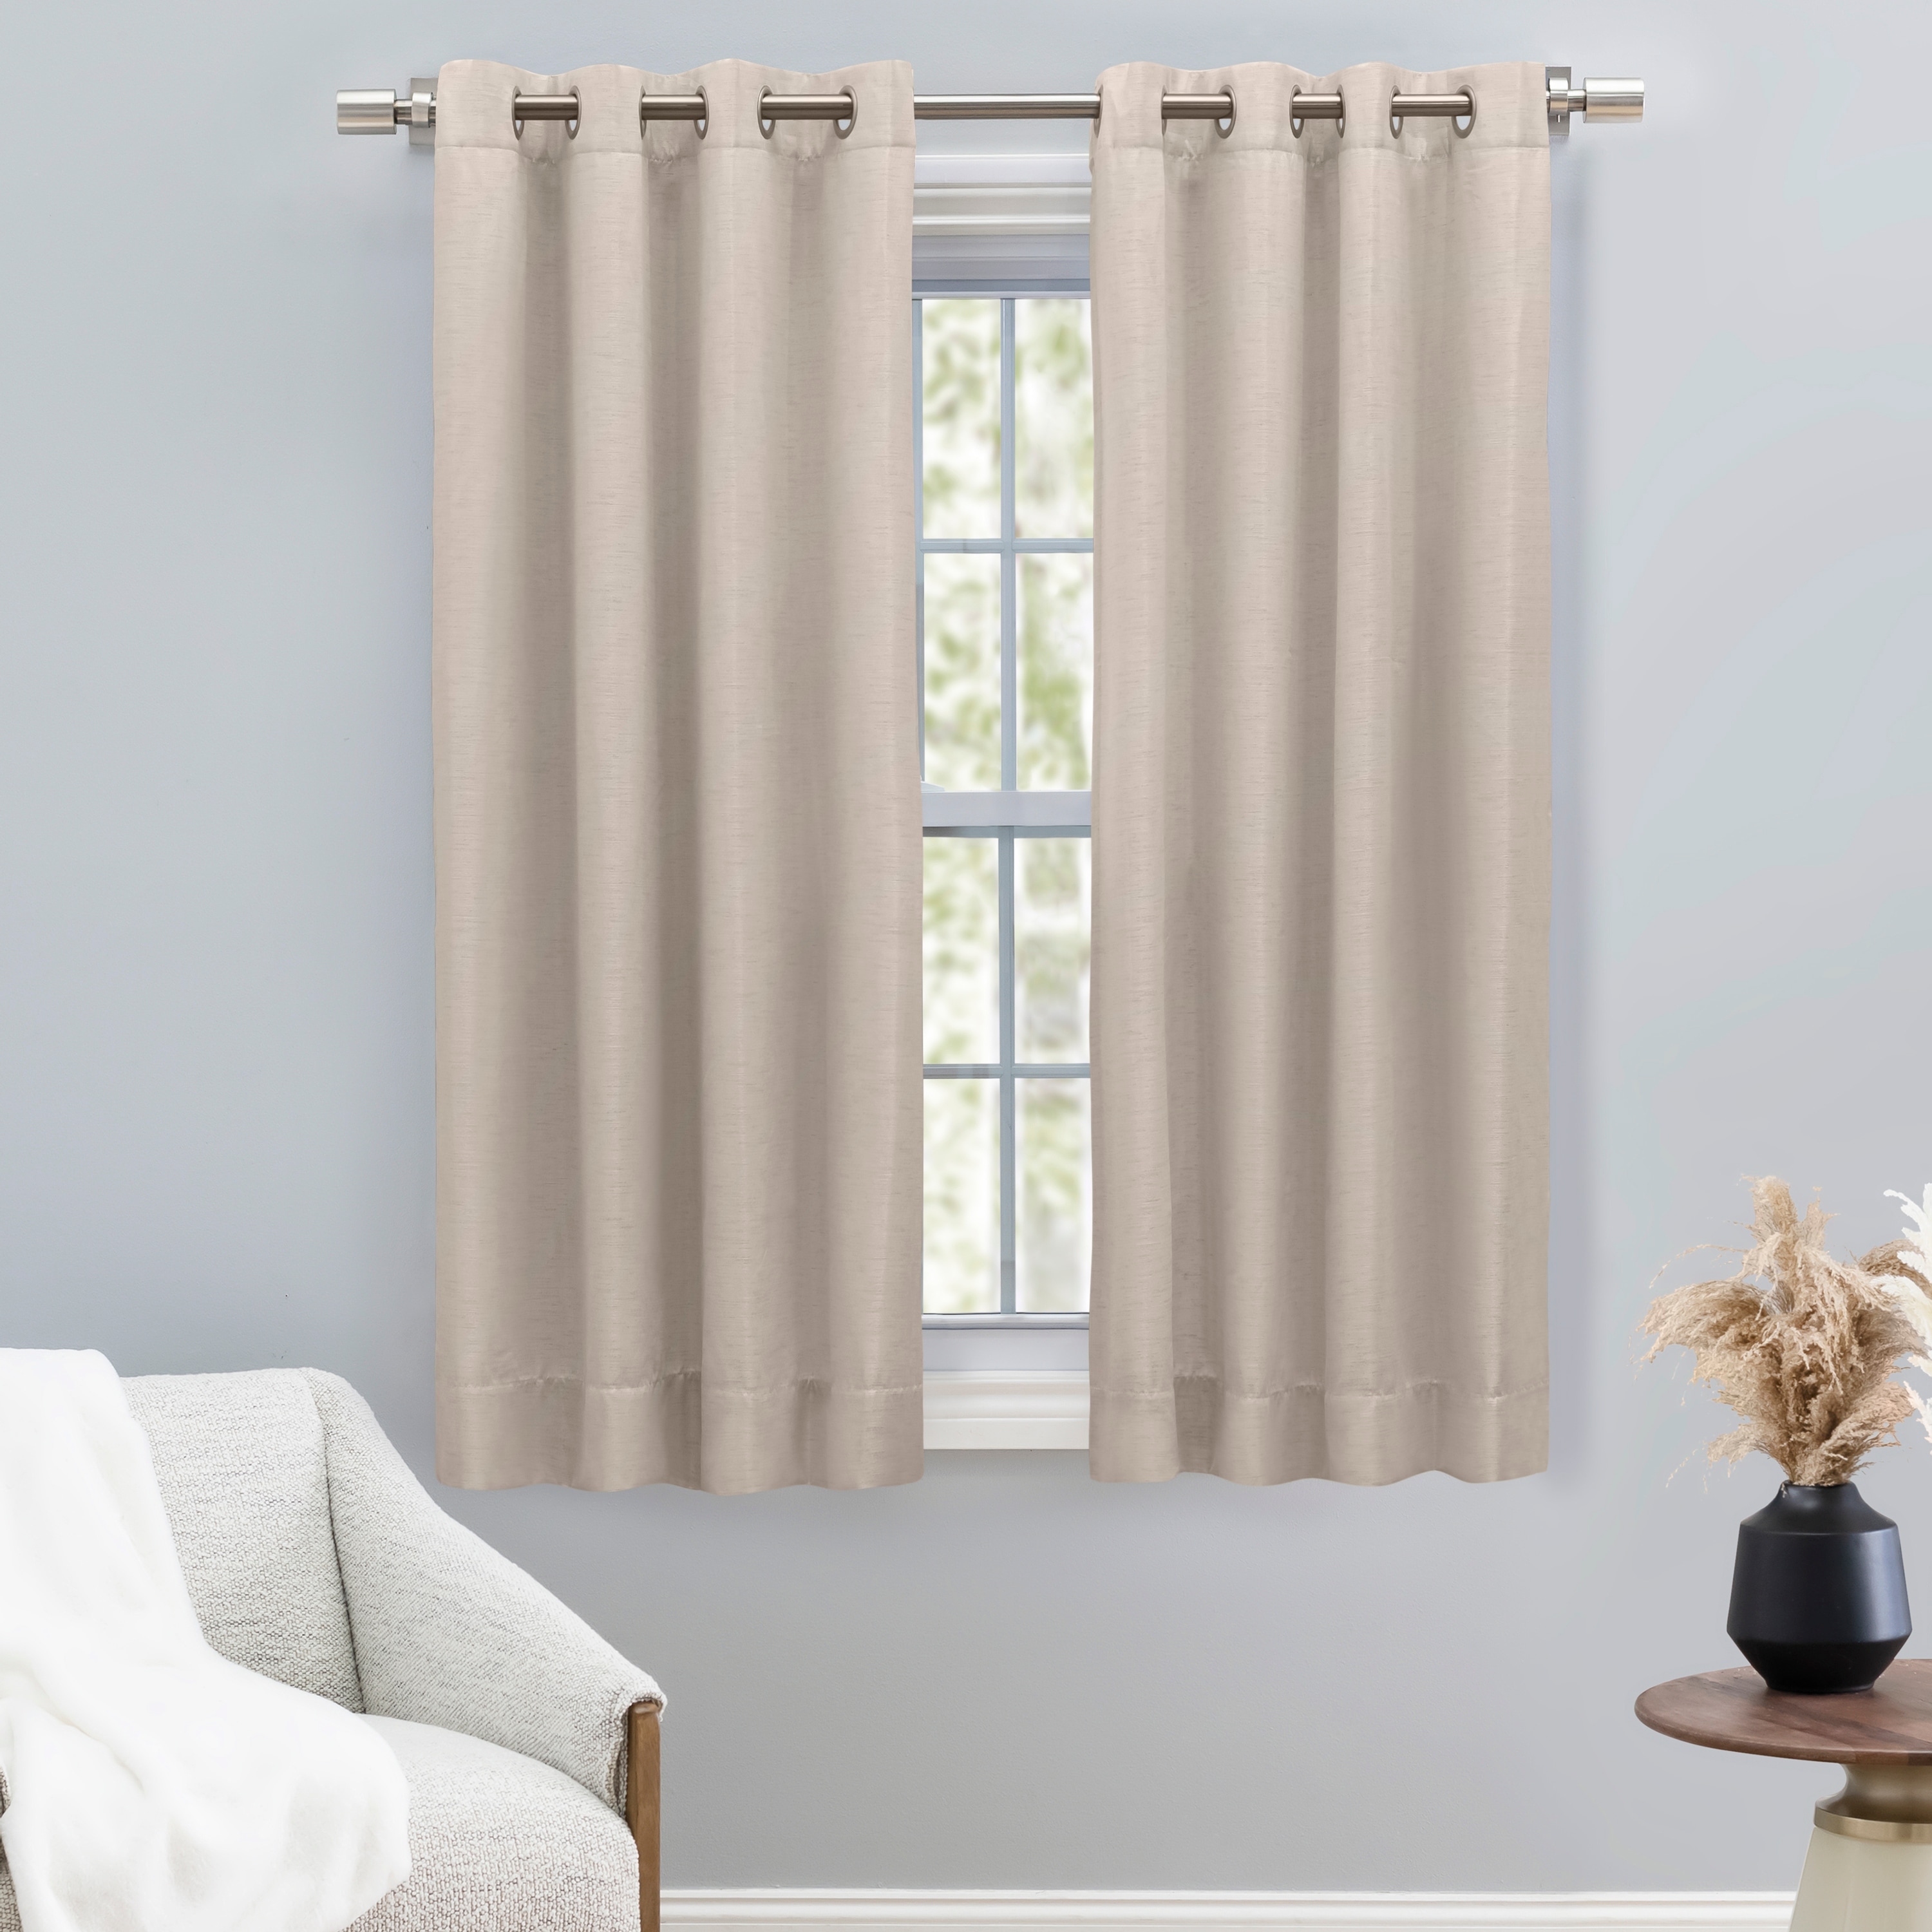 Porch & Den Peete Grasscloth Grommet Short Curtain Panel with Pull Wand